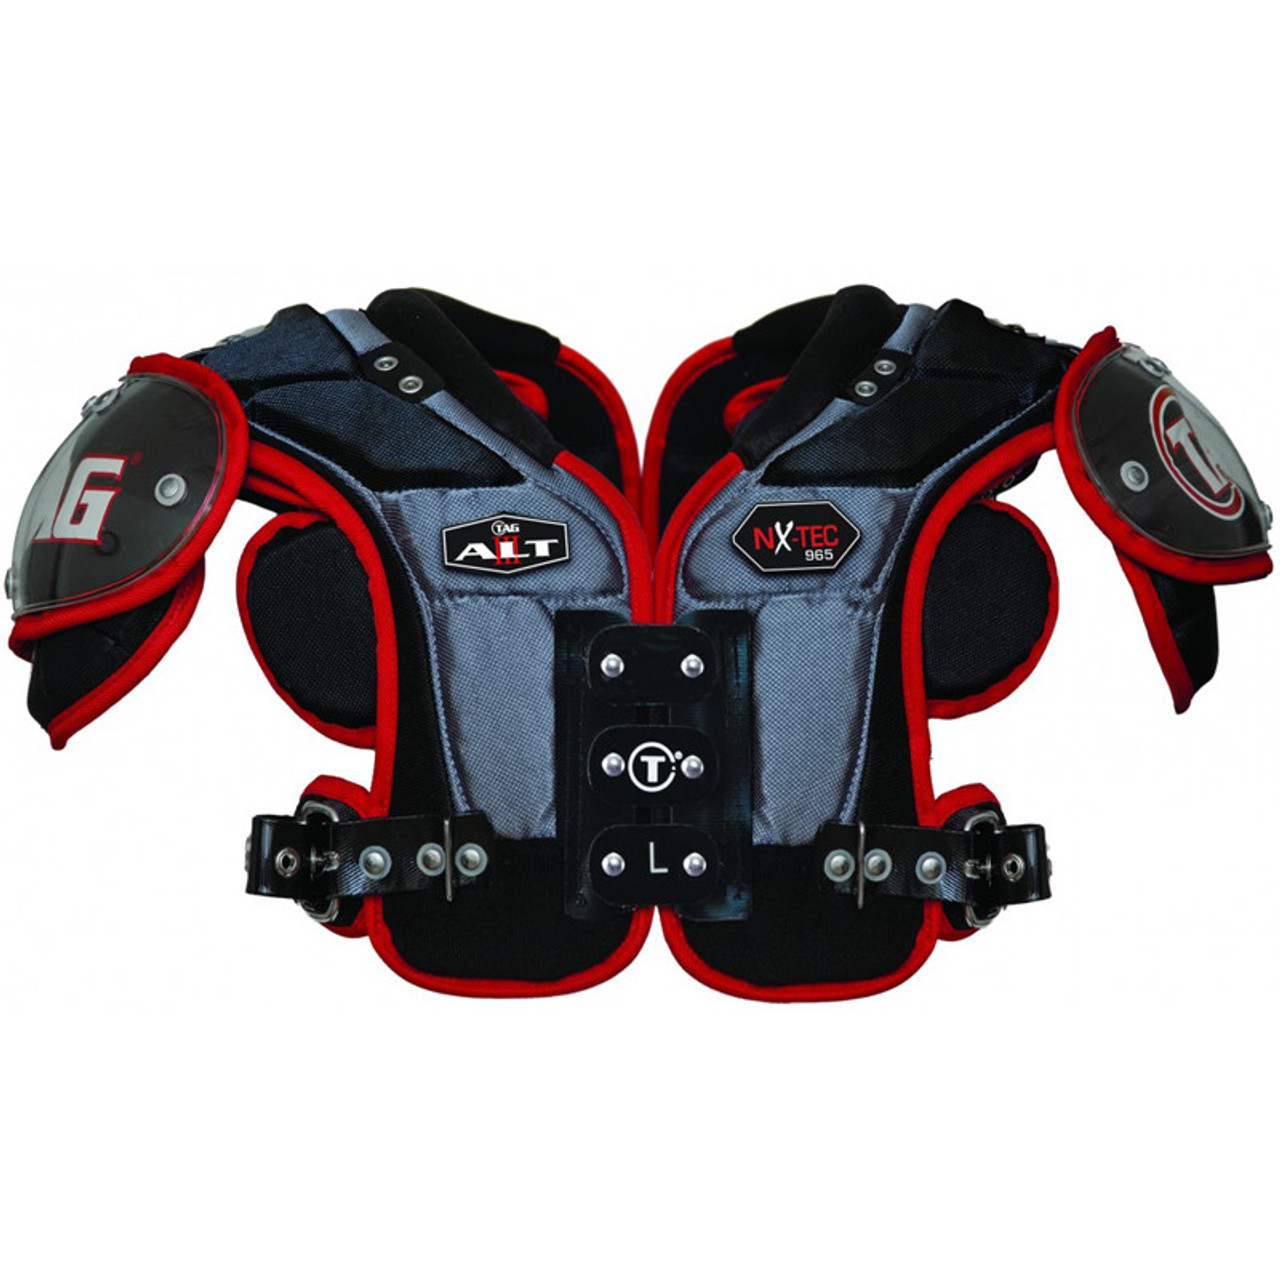 Hockey Pants or Shoulder Pads Wall Mount